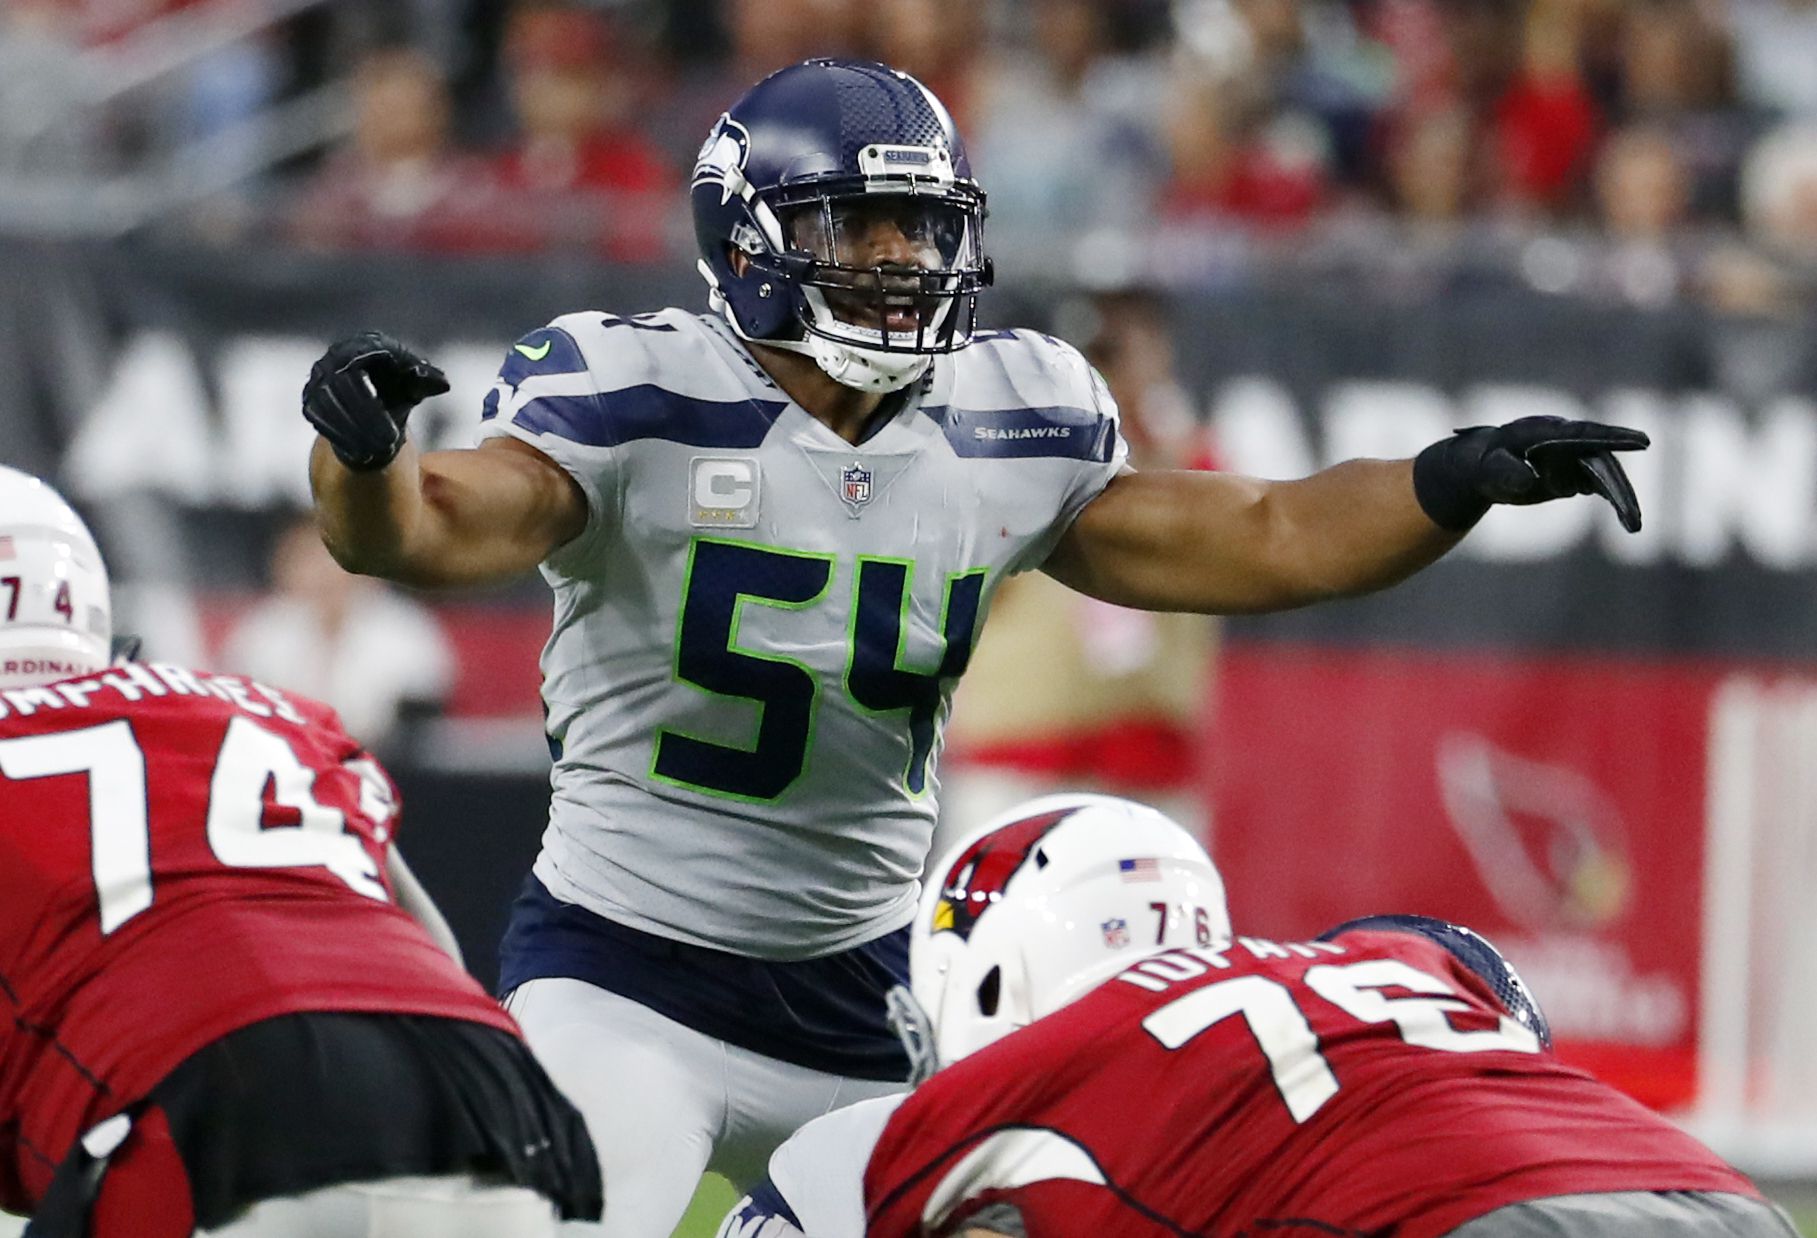 The Seahawks' Bobby Wagner headlines this season's cast of Utahns in the NFL